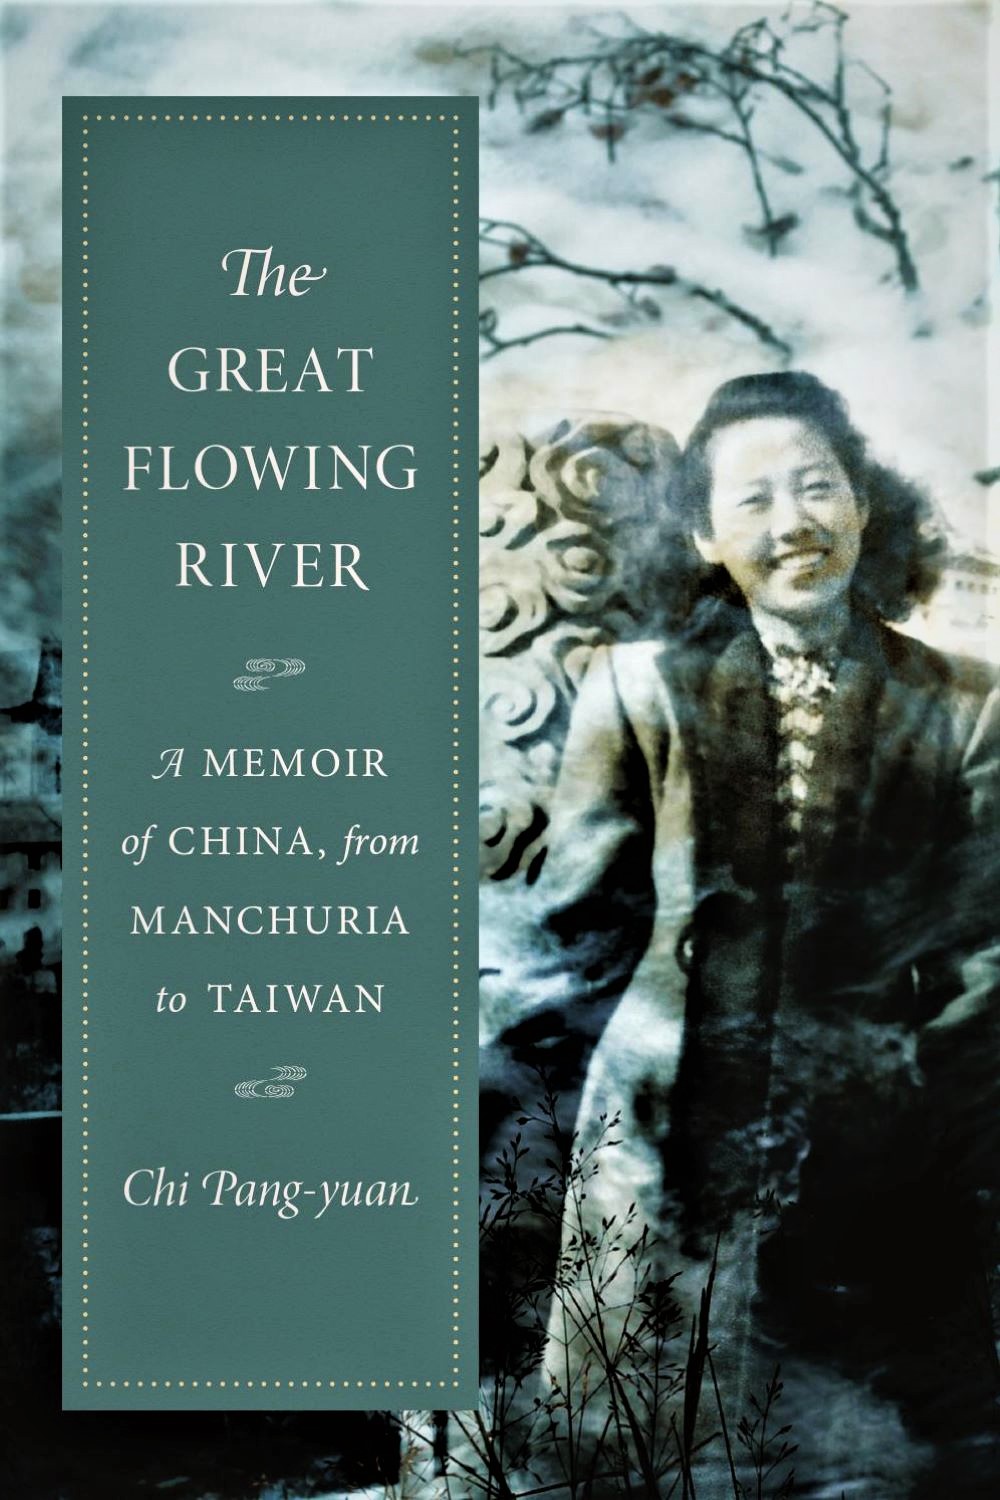 The Great Flowing River by Chi Pang-Yuan